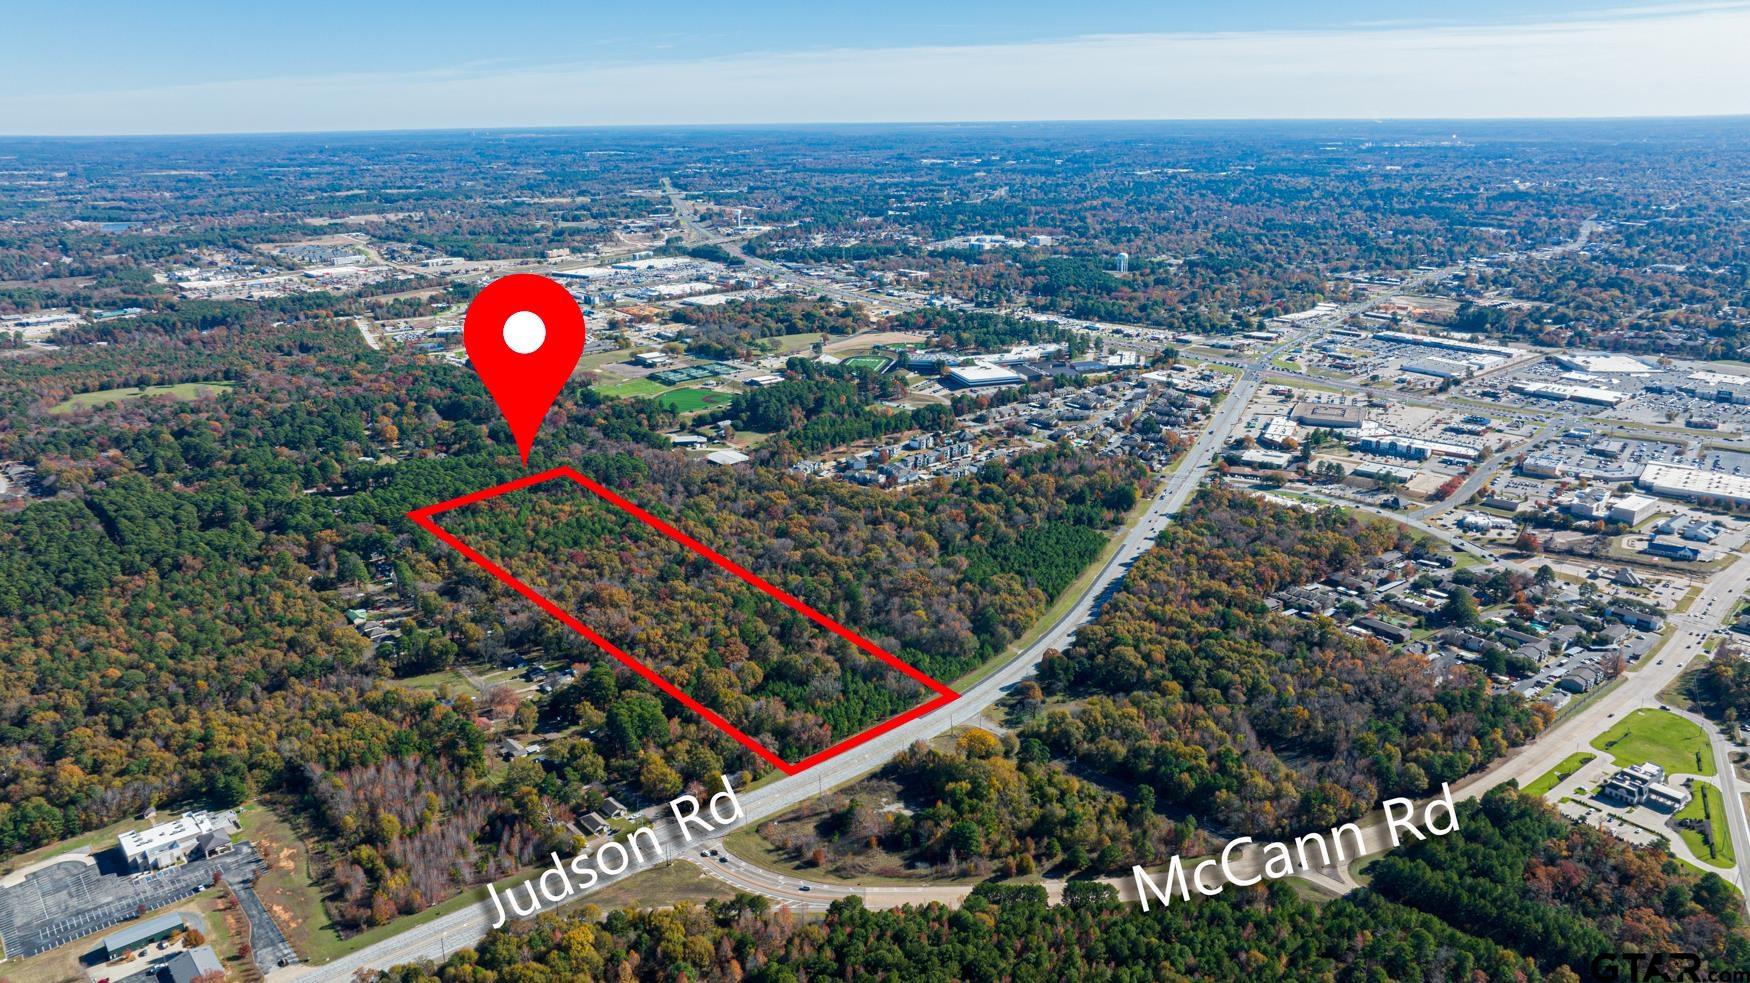 TBD Judson Road, Longview, Texas 75605, ,Land,For Sale,Judson Road,23016334